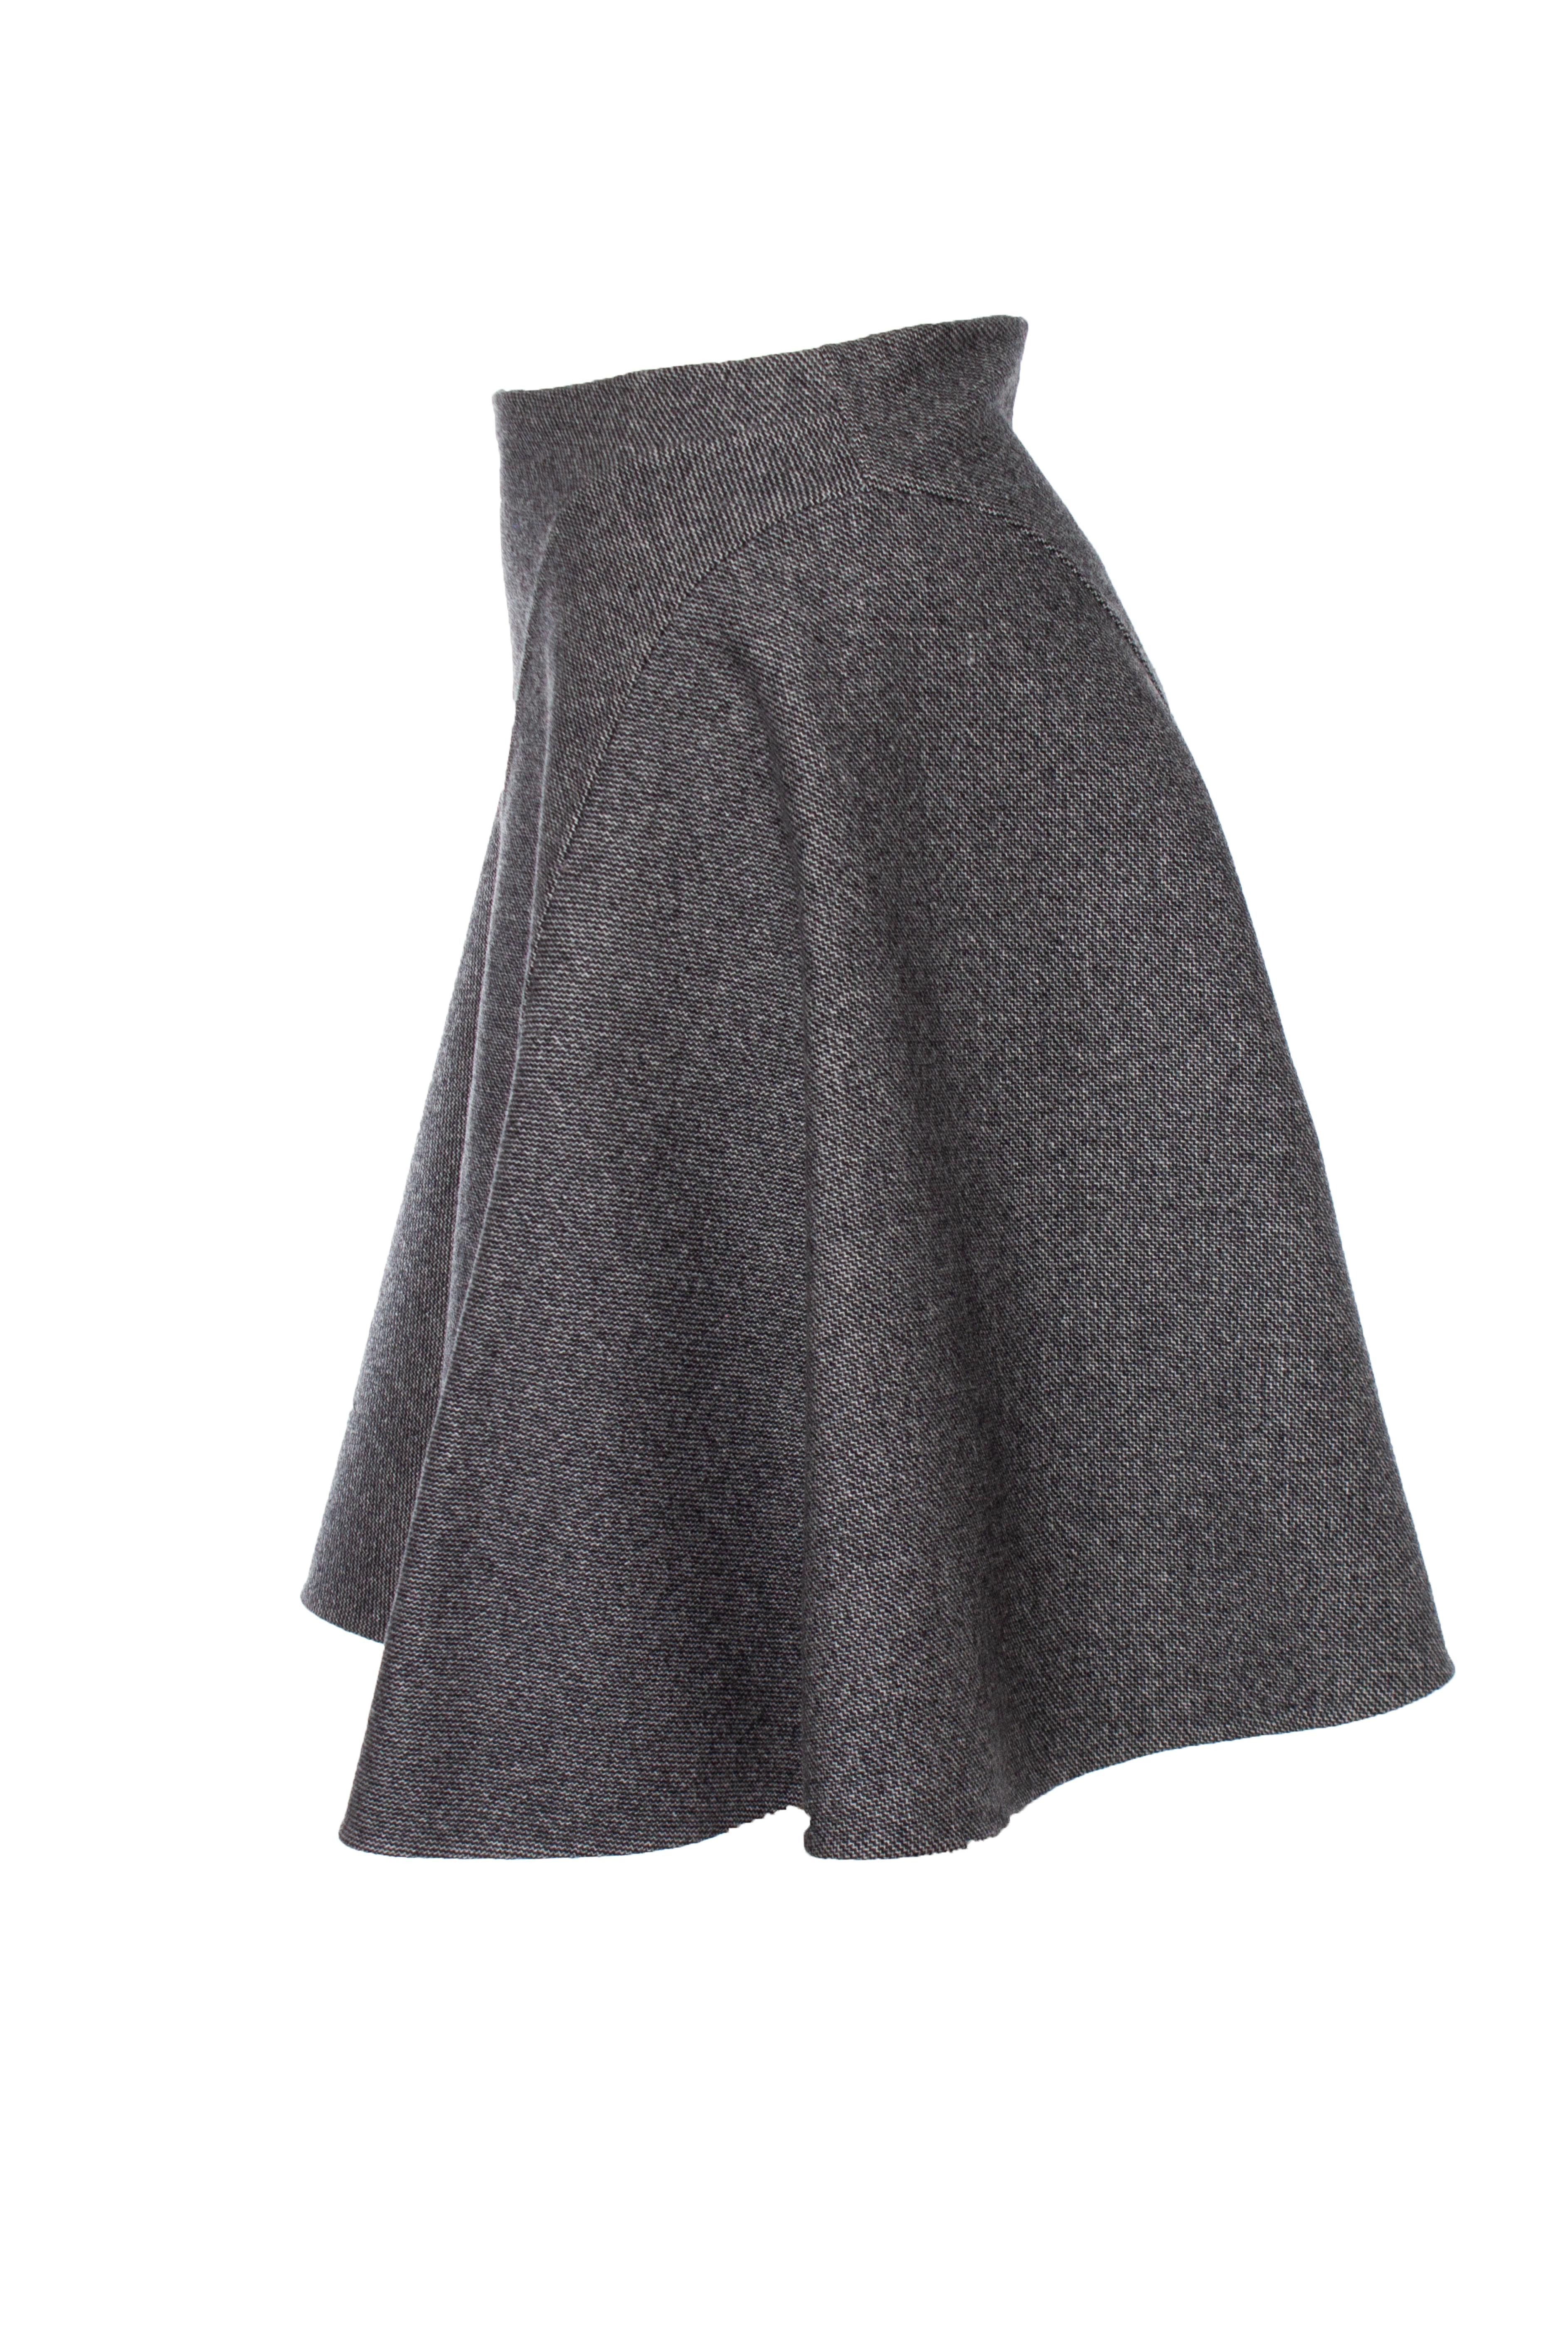 Christian Dior, Grey wool A line skirt. The item is in very good condition.

• CONDITION: very good condition 

• SIZE: DE34 - XS 

• MEASUREMENTS: length 52 cm, waist 33 cm

• MATERIAL: 100% lana virgin wool 

• CARE: dry cleaning 

• COLOR: grey 